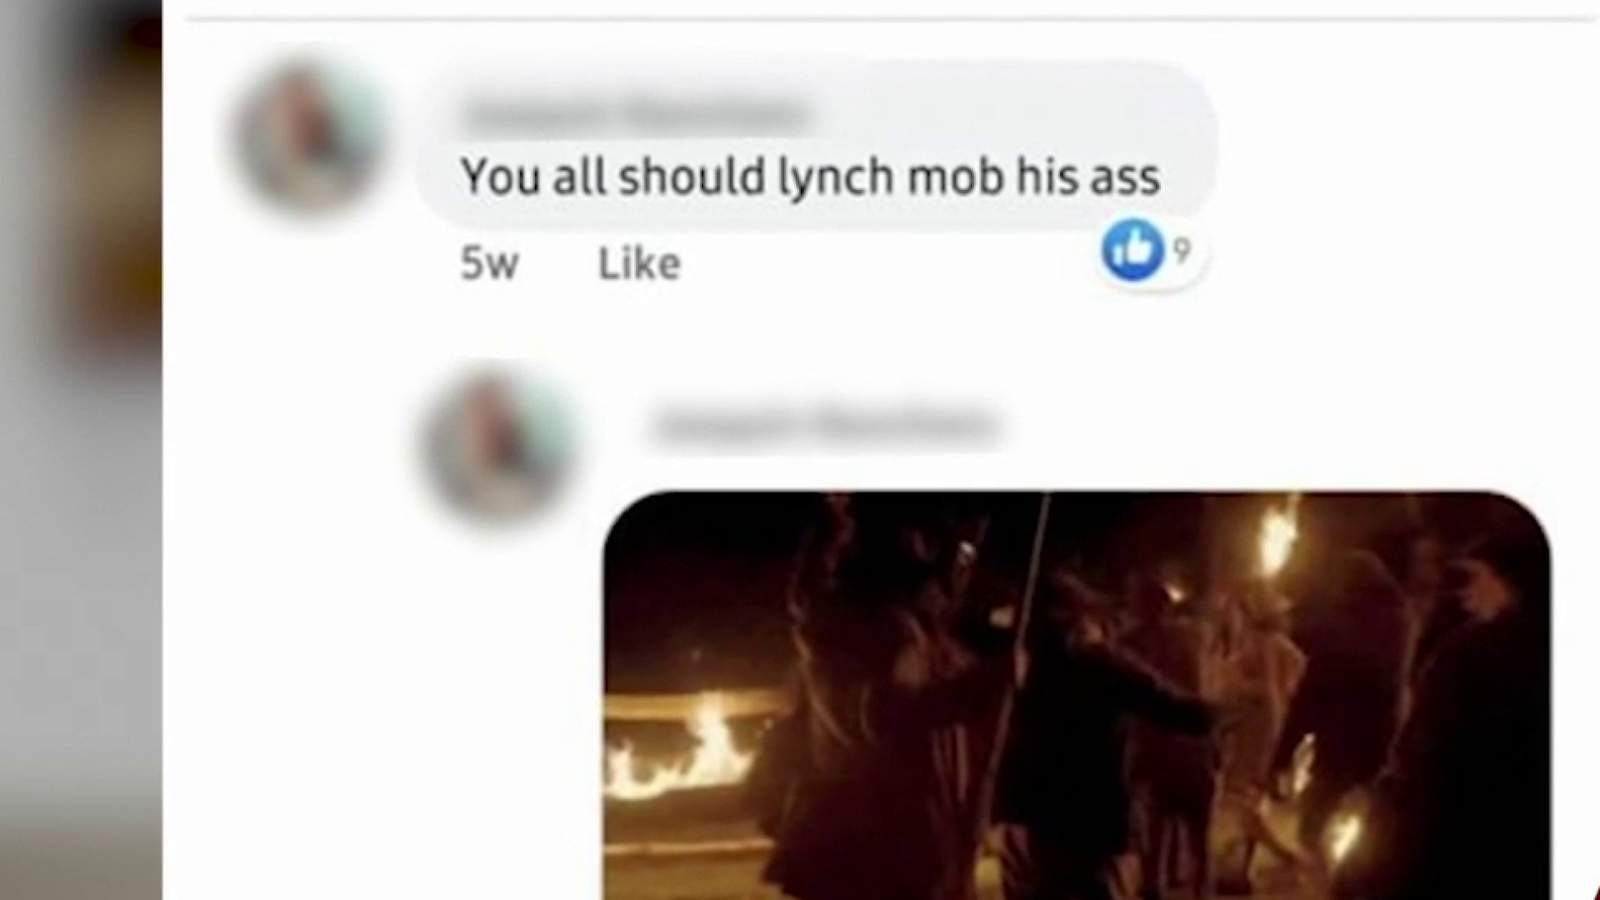 Social media post allegedly made by a Bexar County sheriffs deputy calls for someone to be lynched